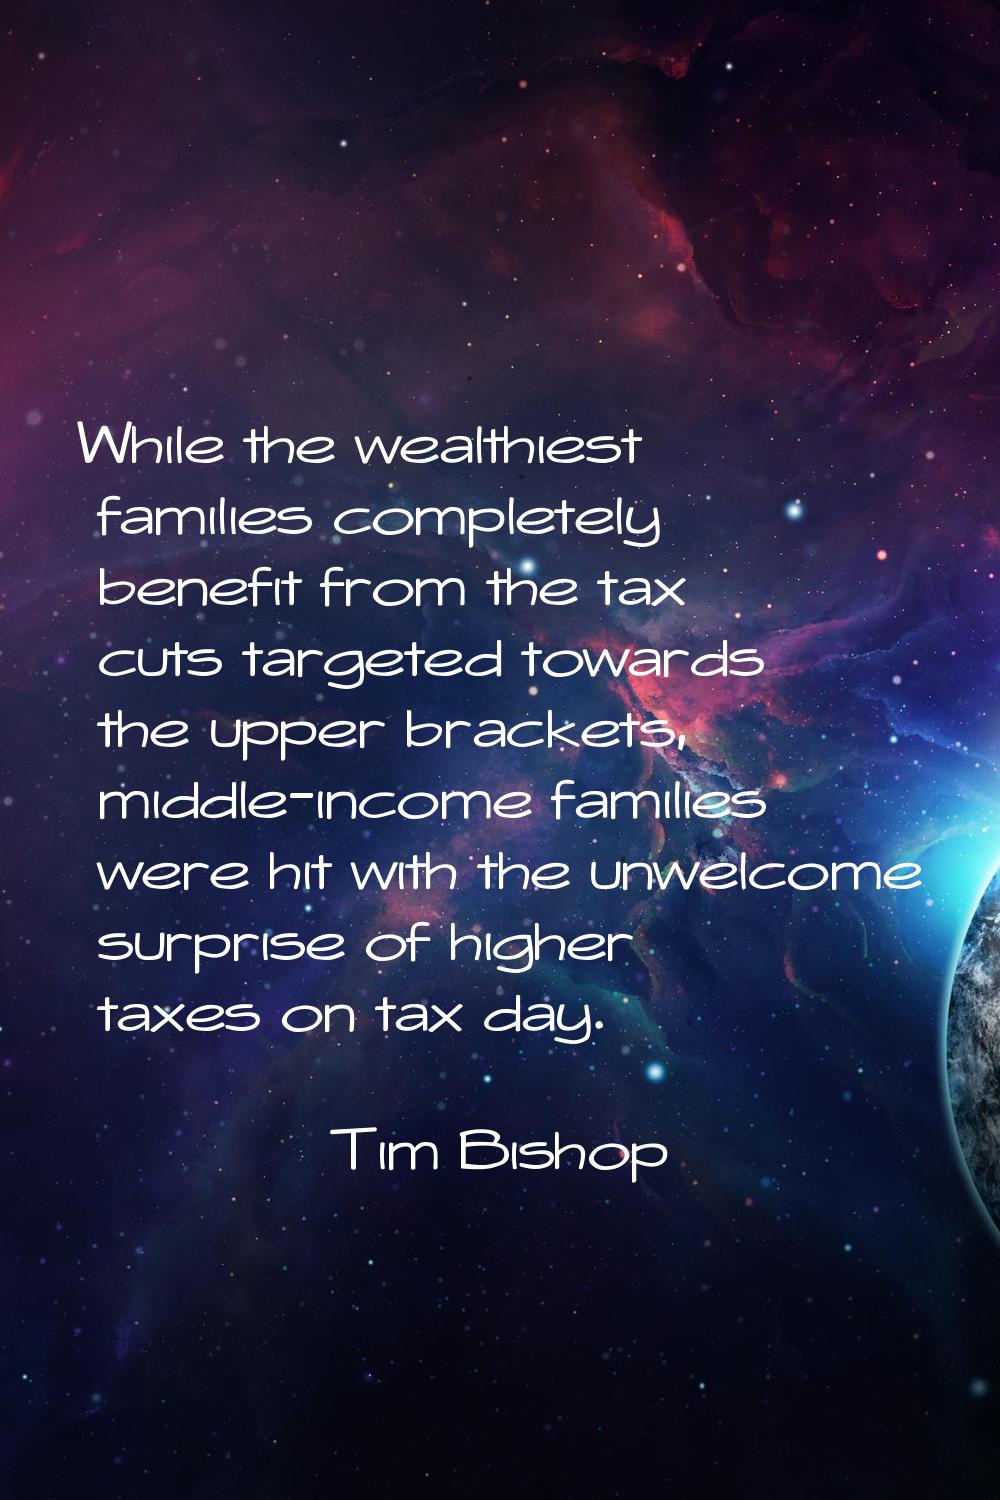 While the wealthiest families completely benefit from the tax cuts targeted towards the upper brack